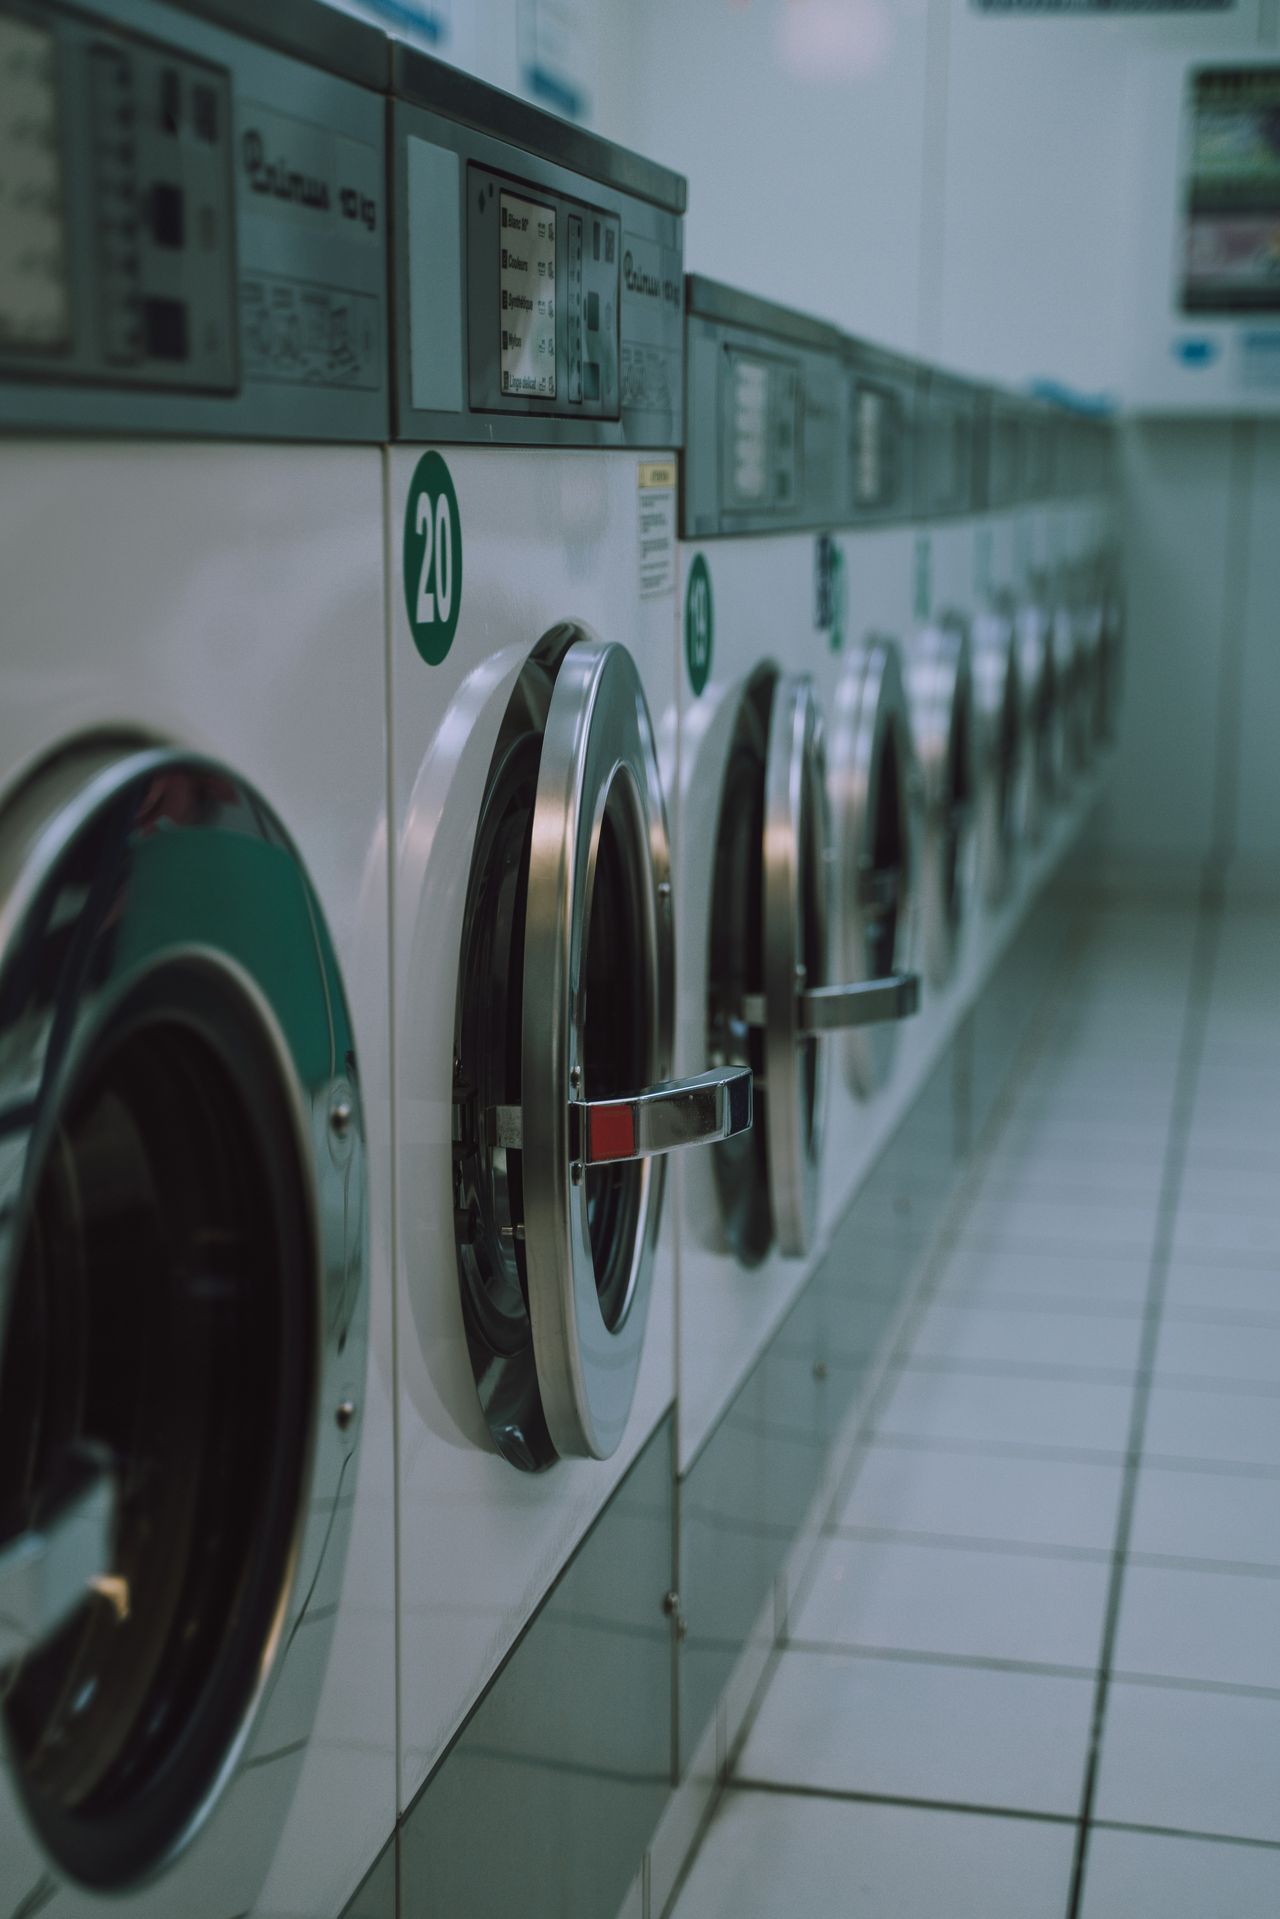 Internet-connected washing machines flaws expose security lapse